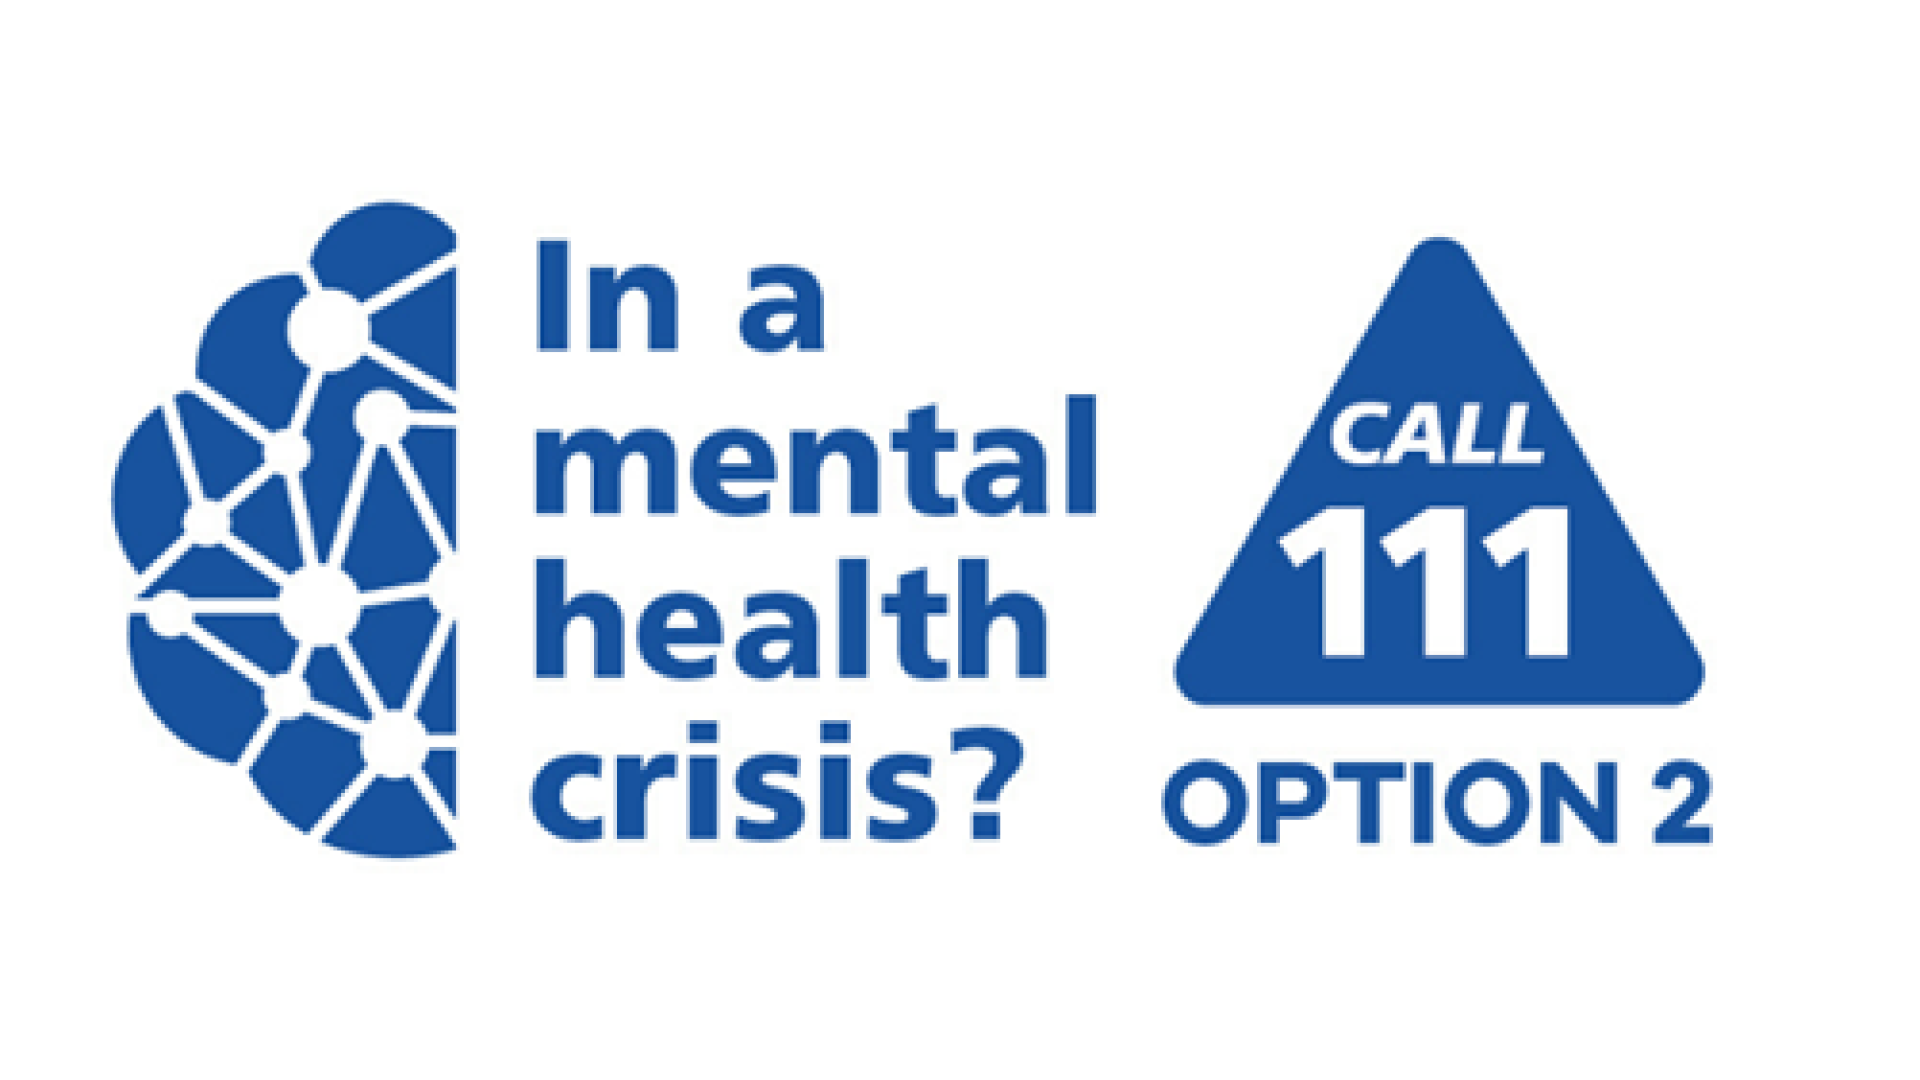 In a mental health crisis? Call 111 option 2